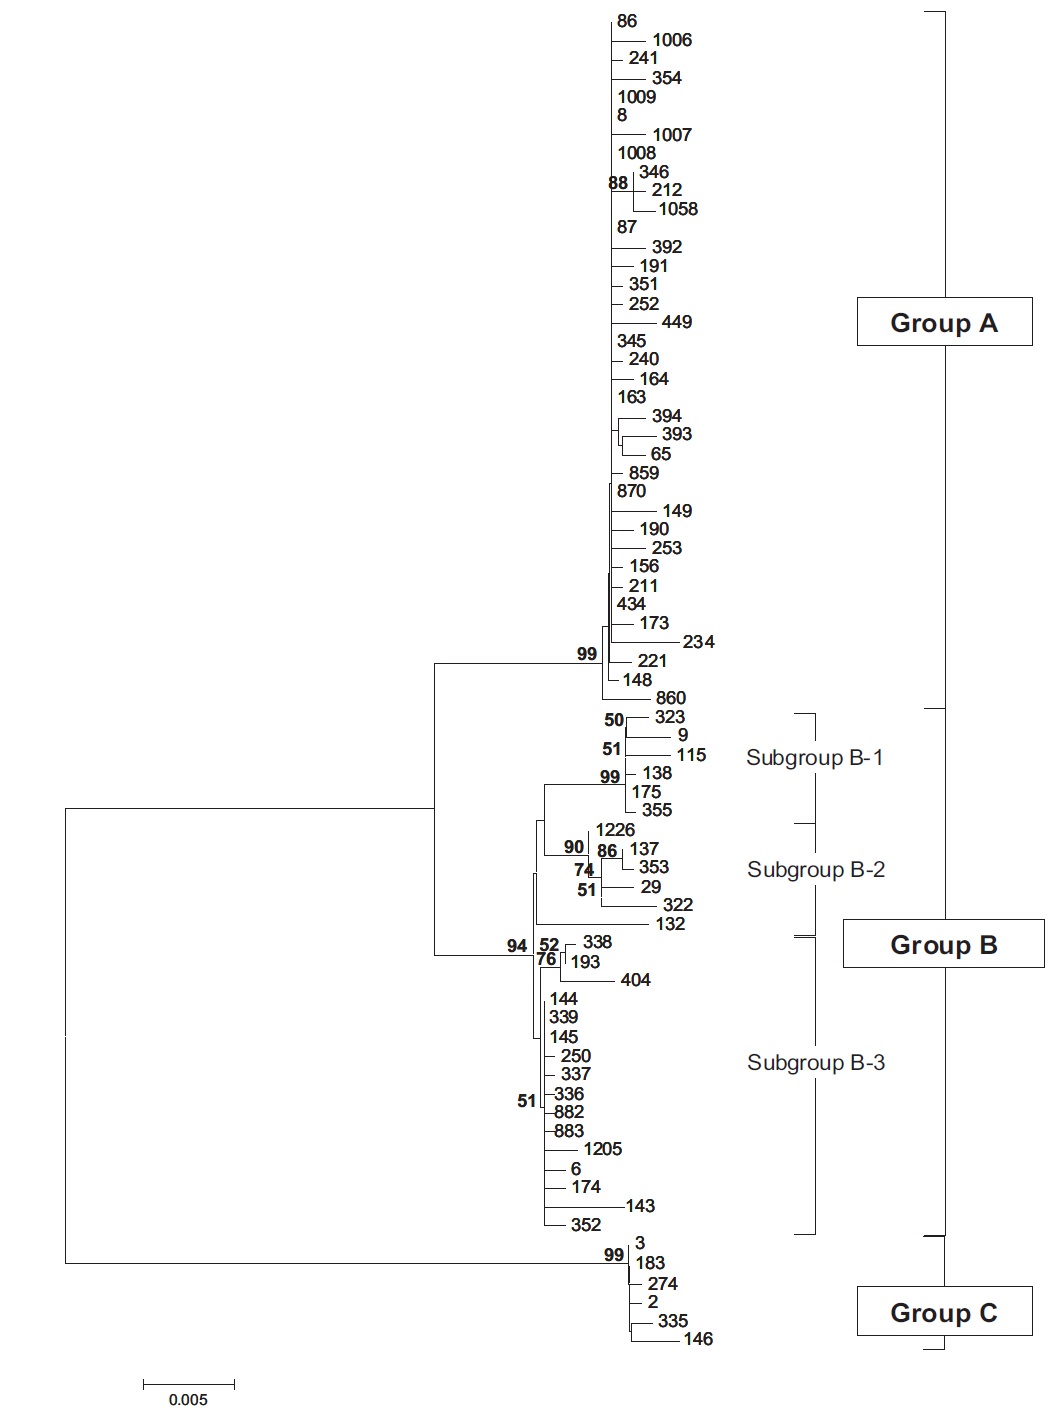 Molecular phylogenetic tree using the Neighbor-joining method inferred from 18S ribosomal DNA sequences of 71 Chlorella-like species. Tree reliability is tested by 2000 bootstraps, which indicates numbers (bold letters) at the nodes. Only values above 50% are shown.